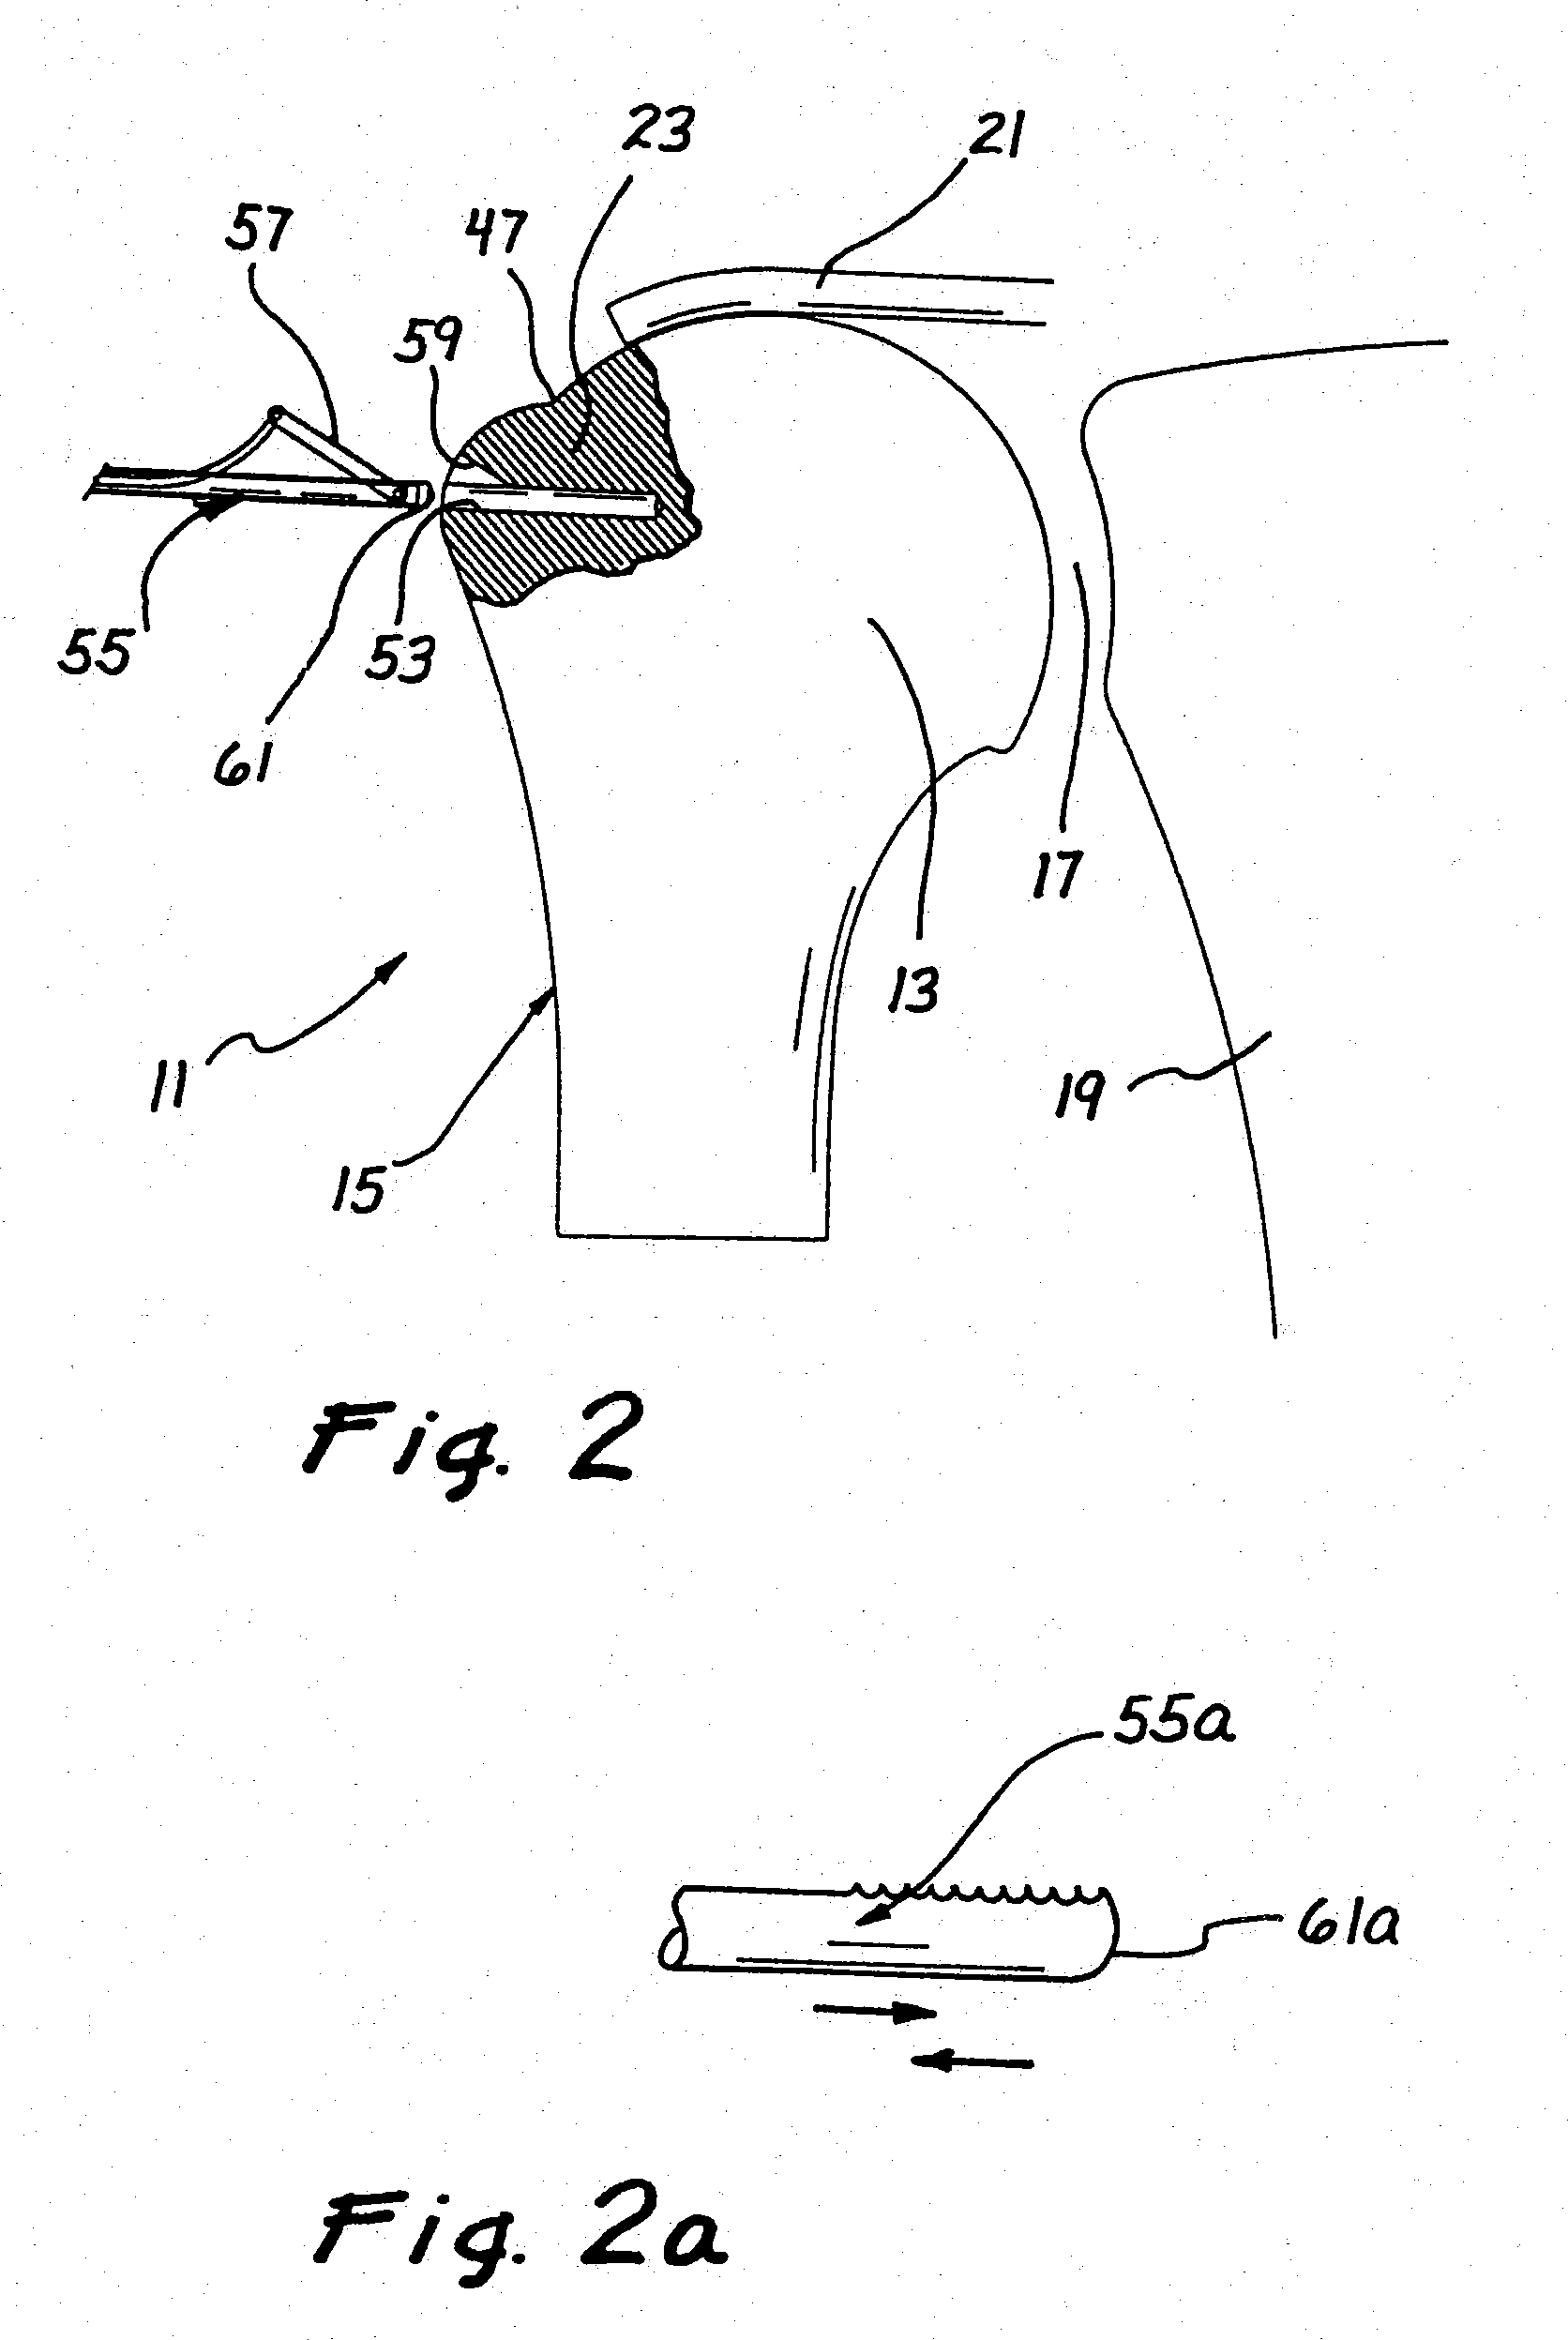 Methods for attaching connective tissues to bone using a multi-component anchor